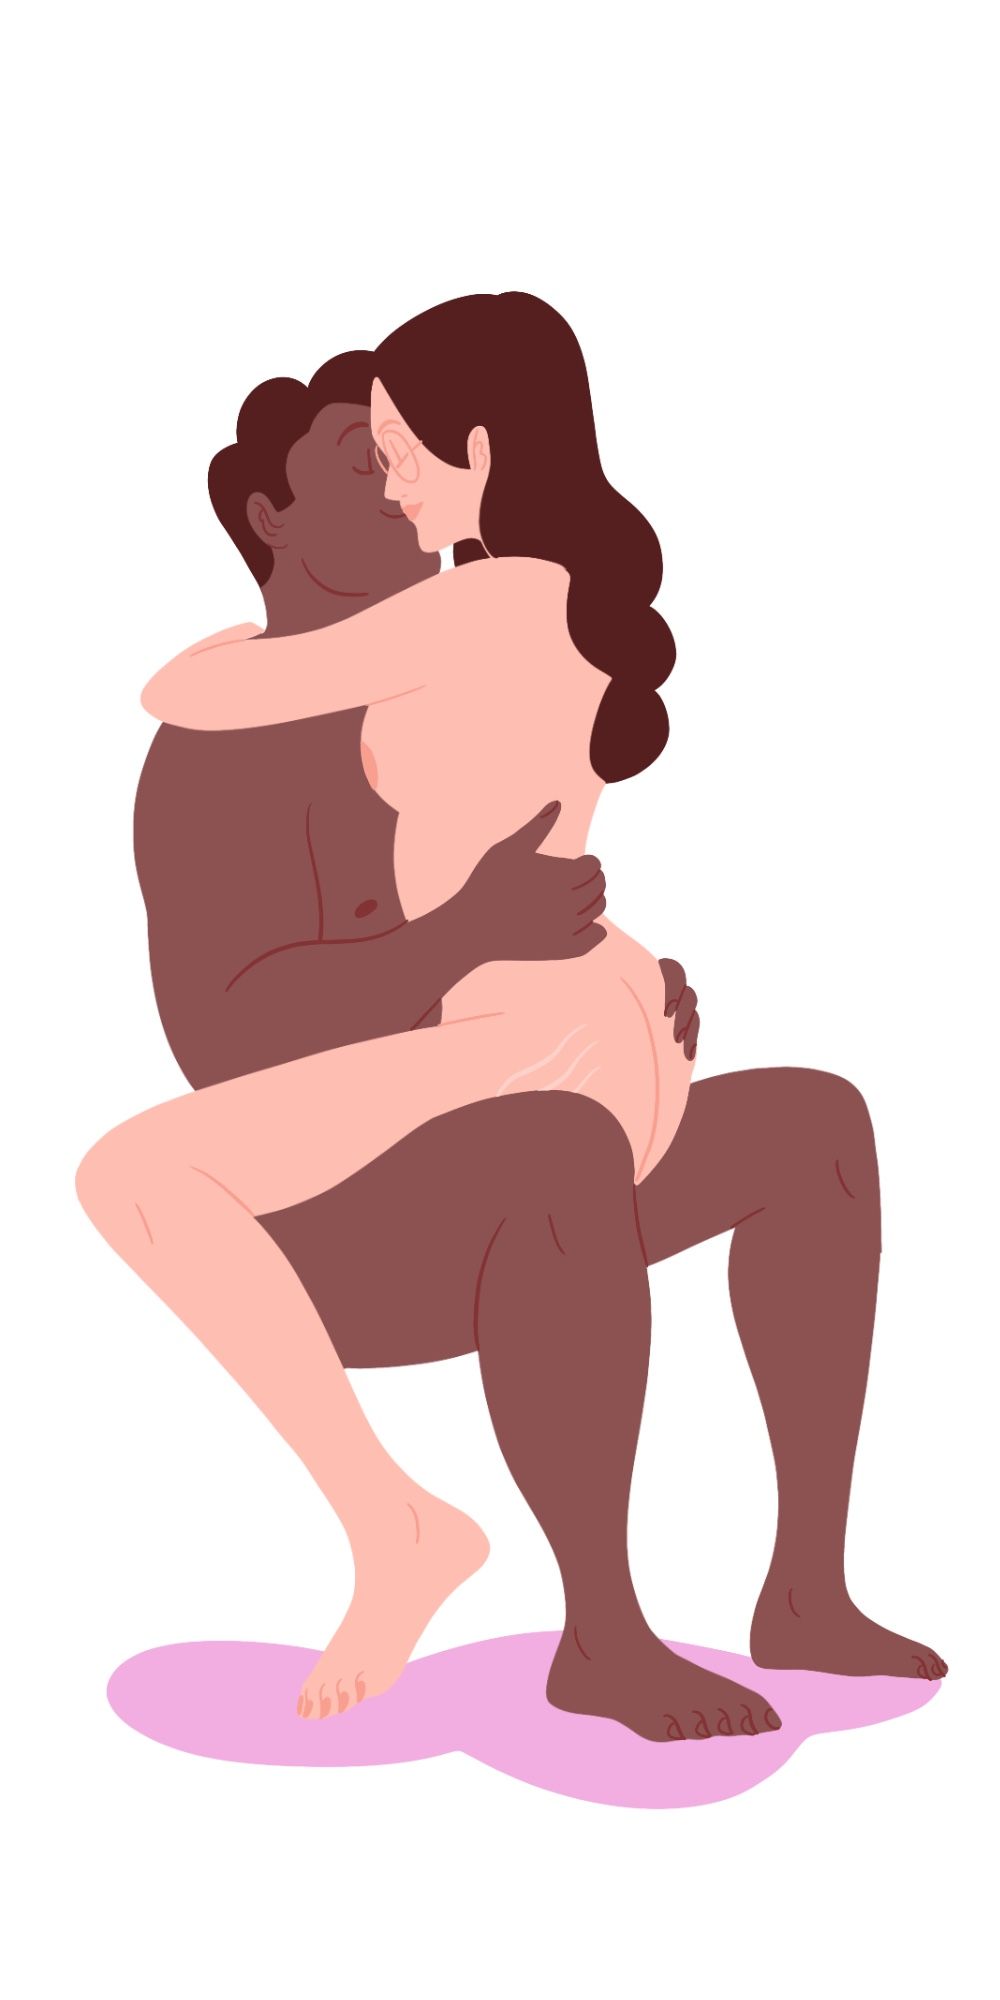 6 Chair Sex Positions image